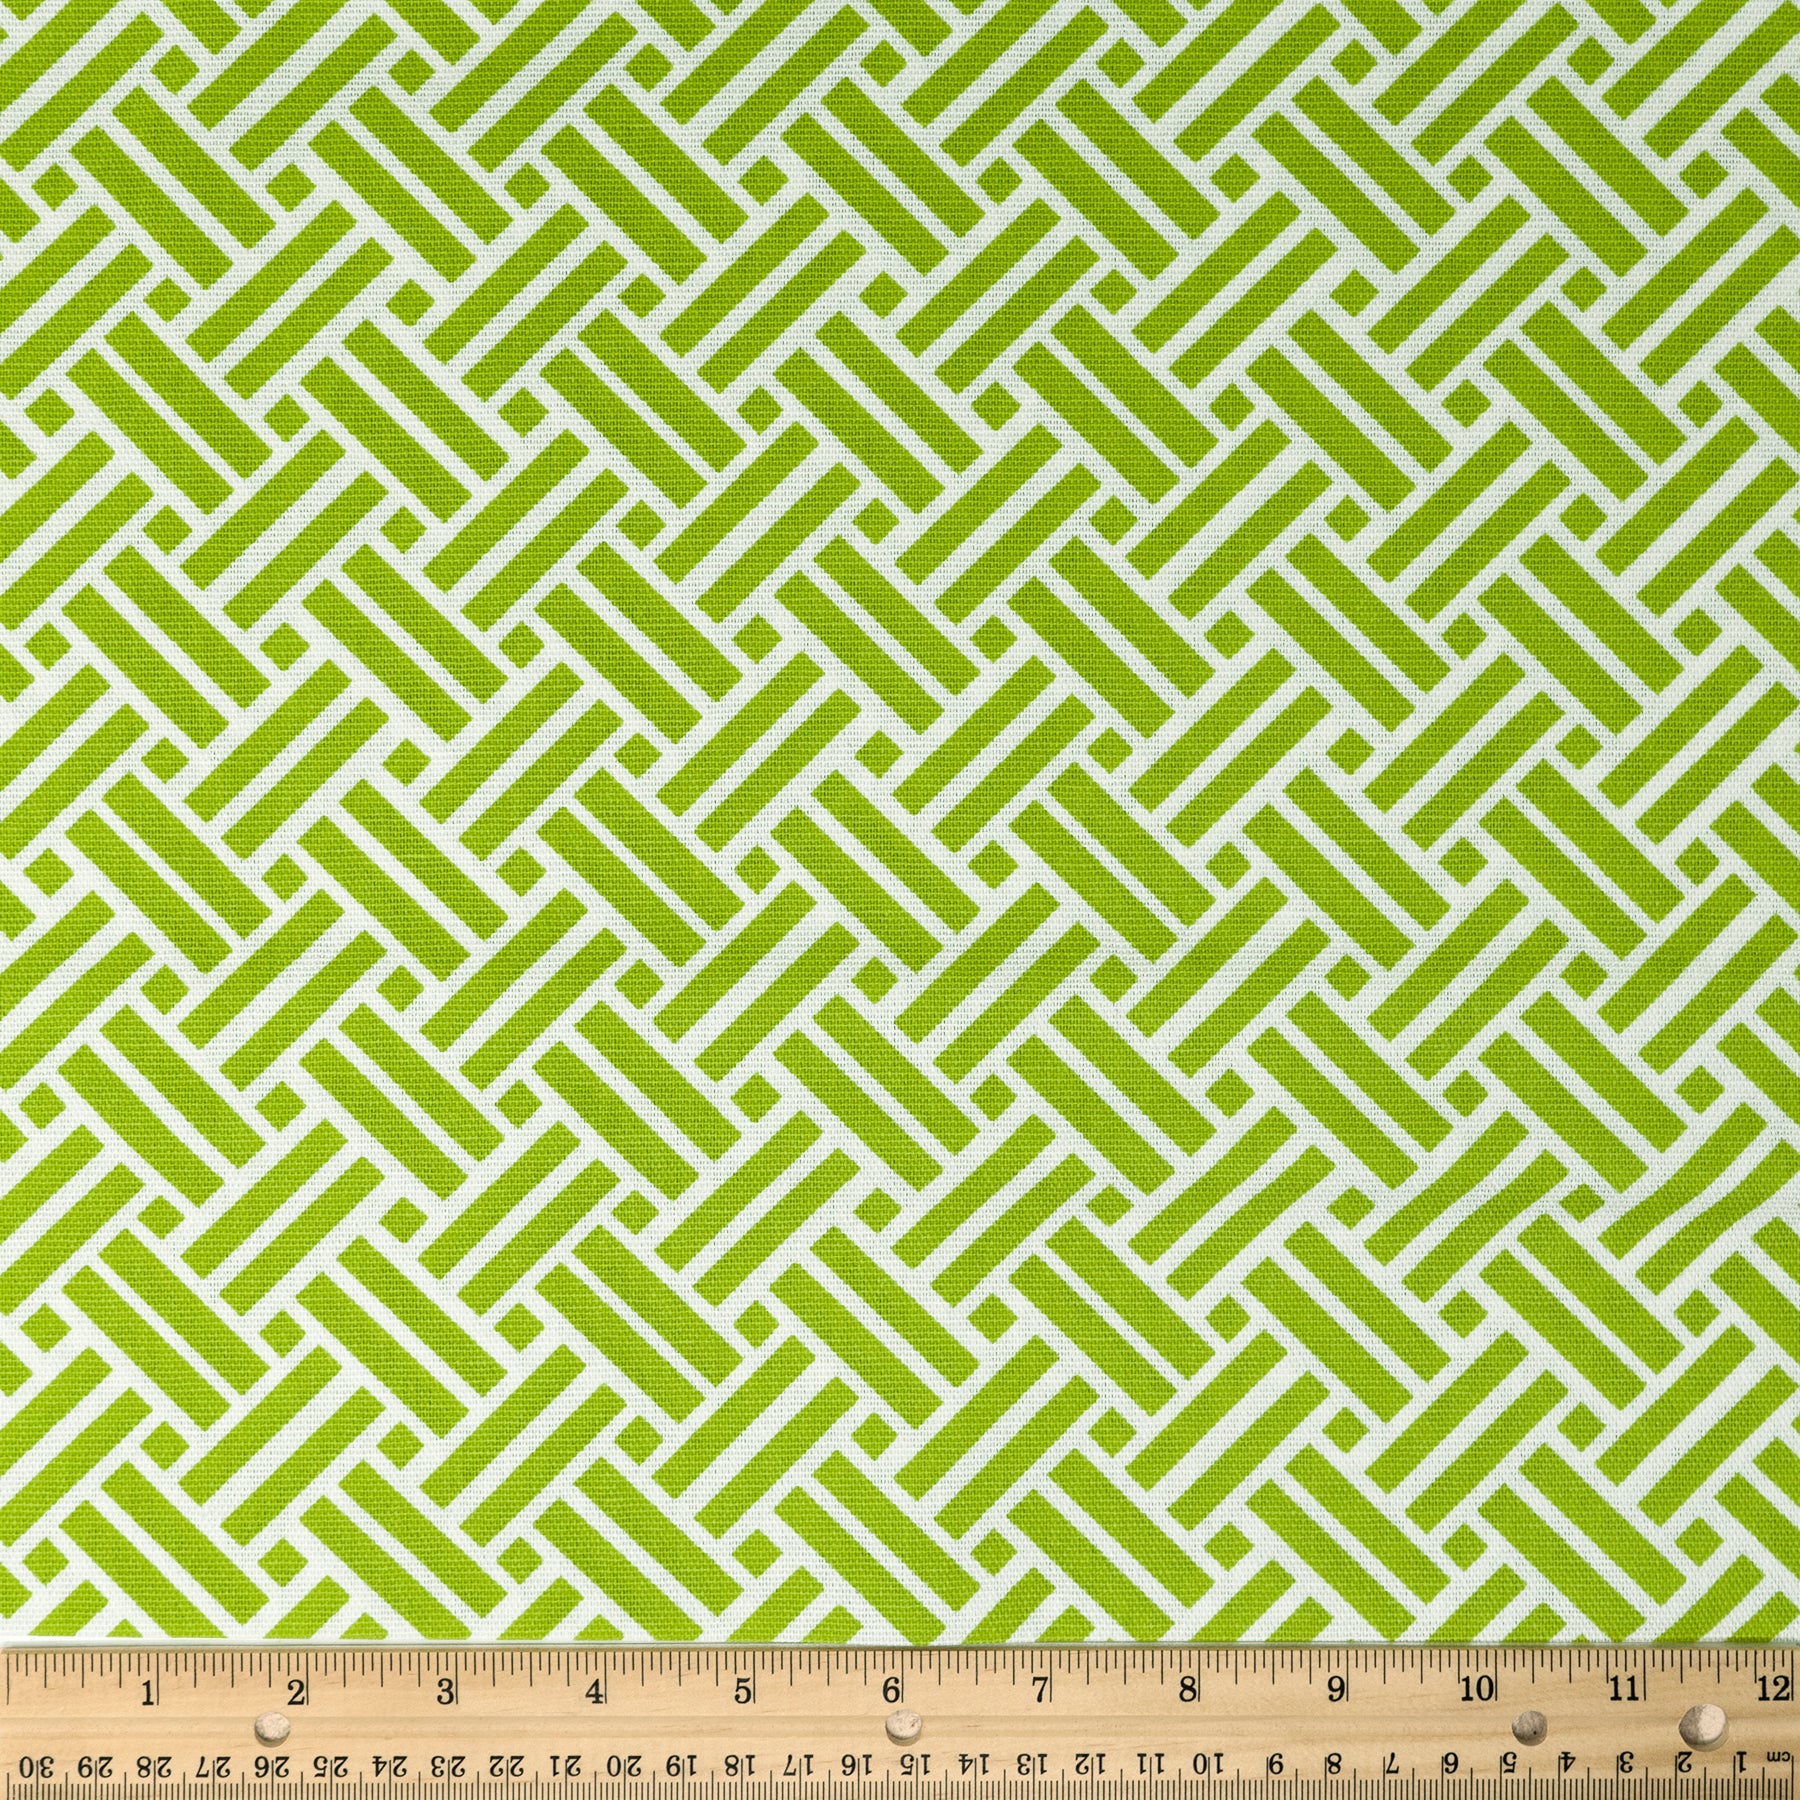 Waverly Inspirations Cotton Duck 45" Zigzag Geo Brunt Green Color Sewing Fabric by the Yard